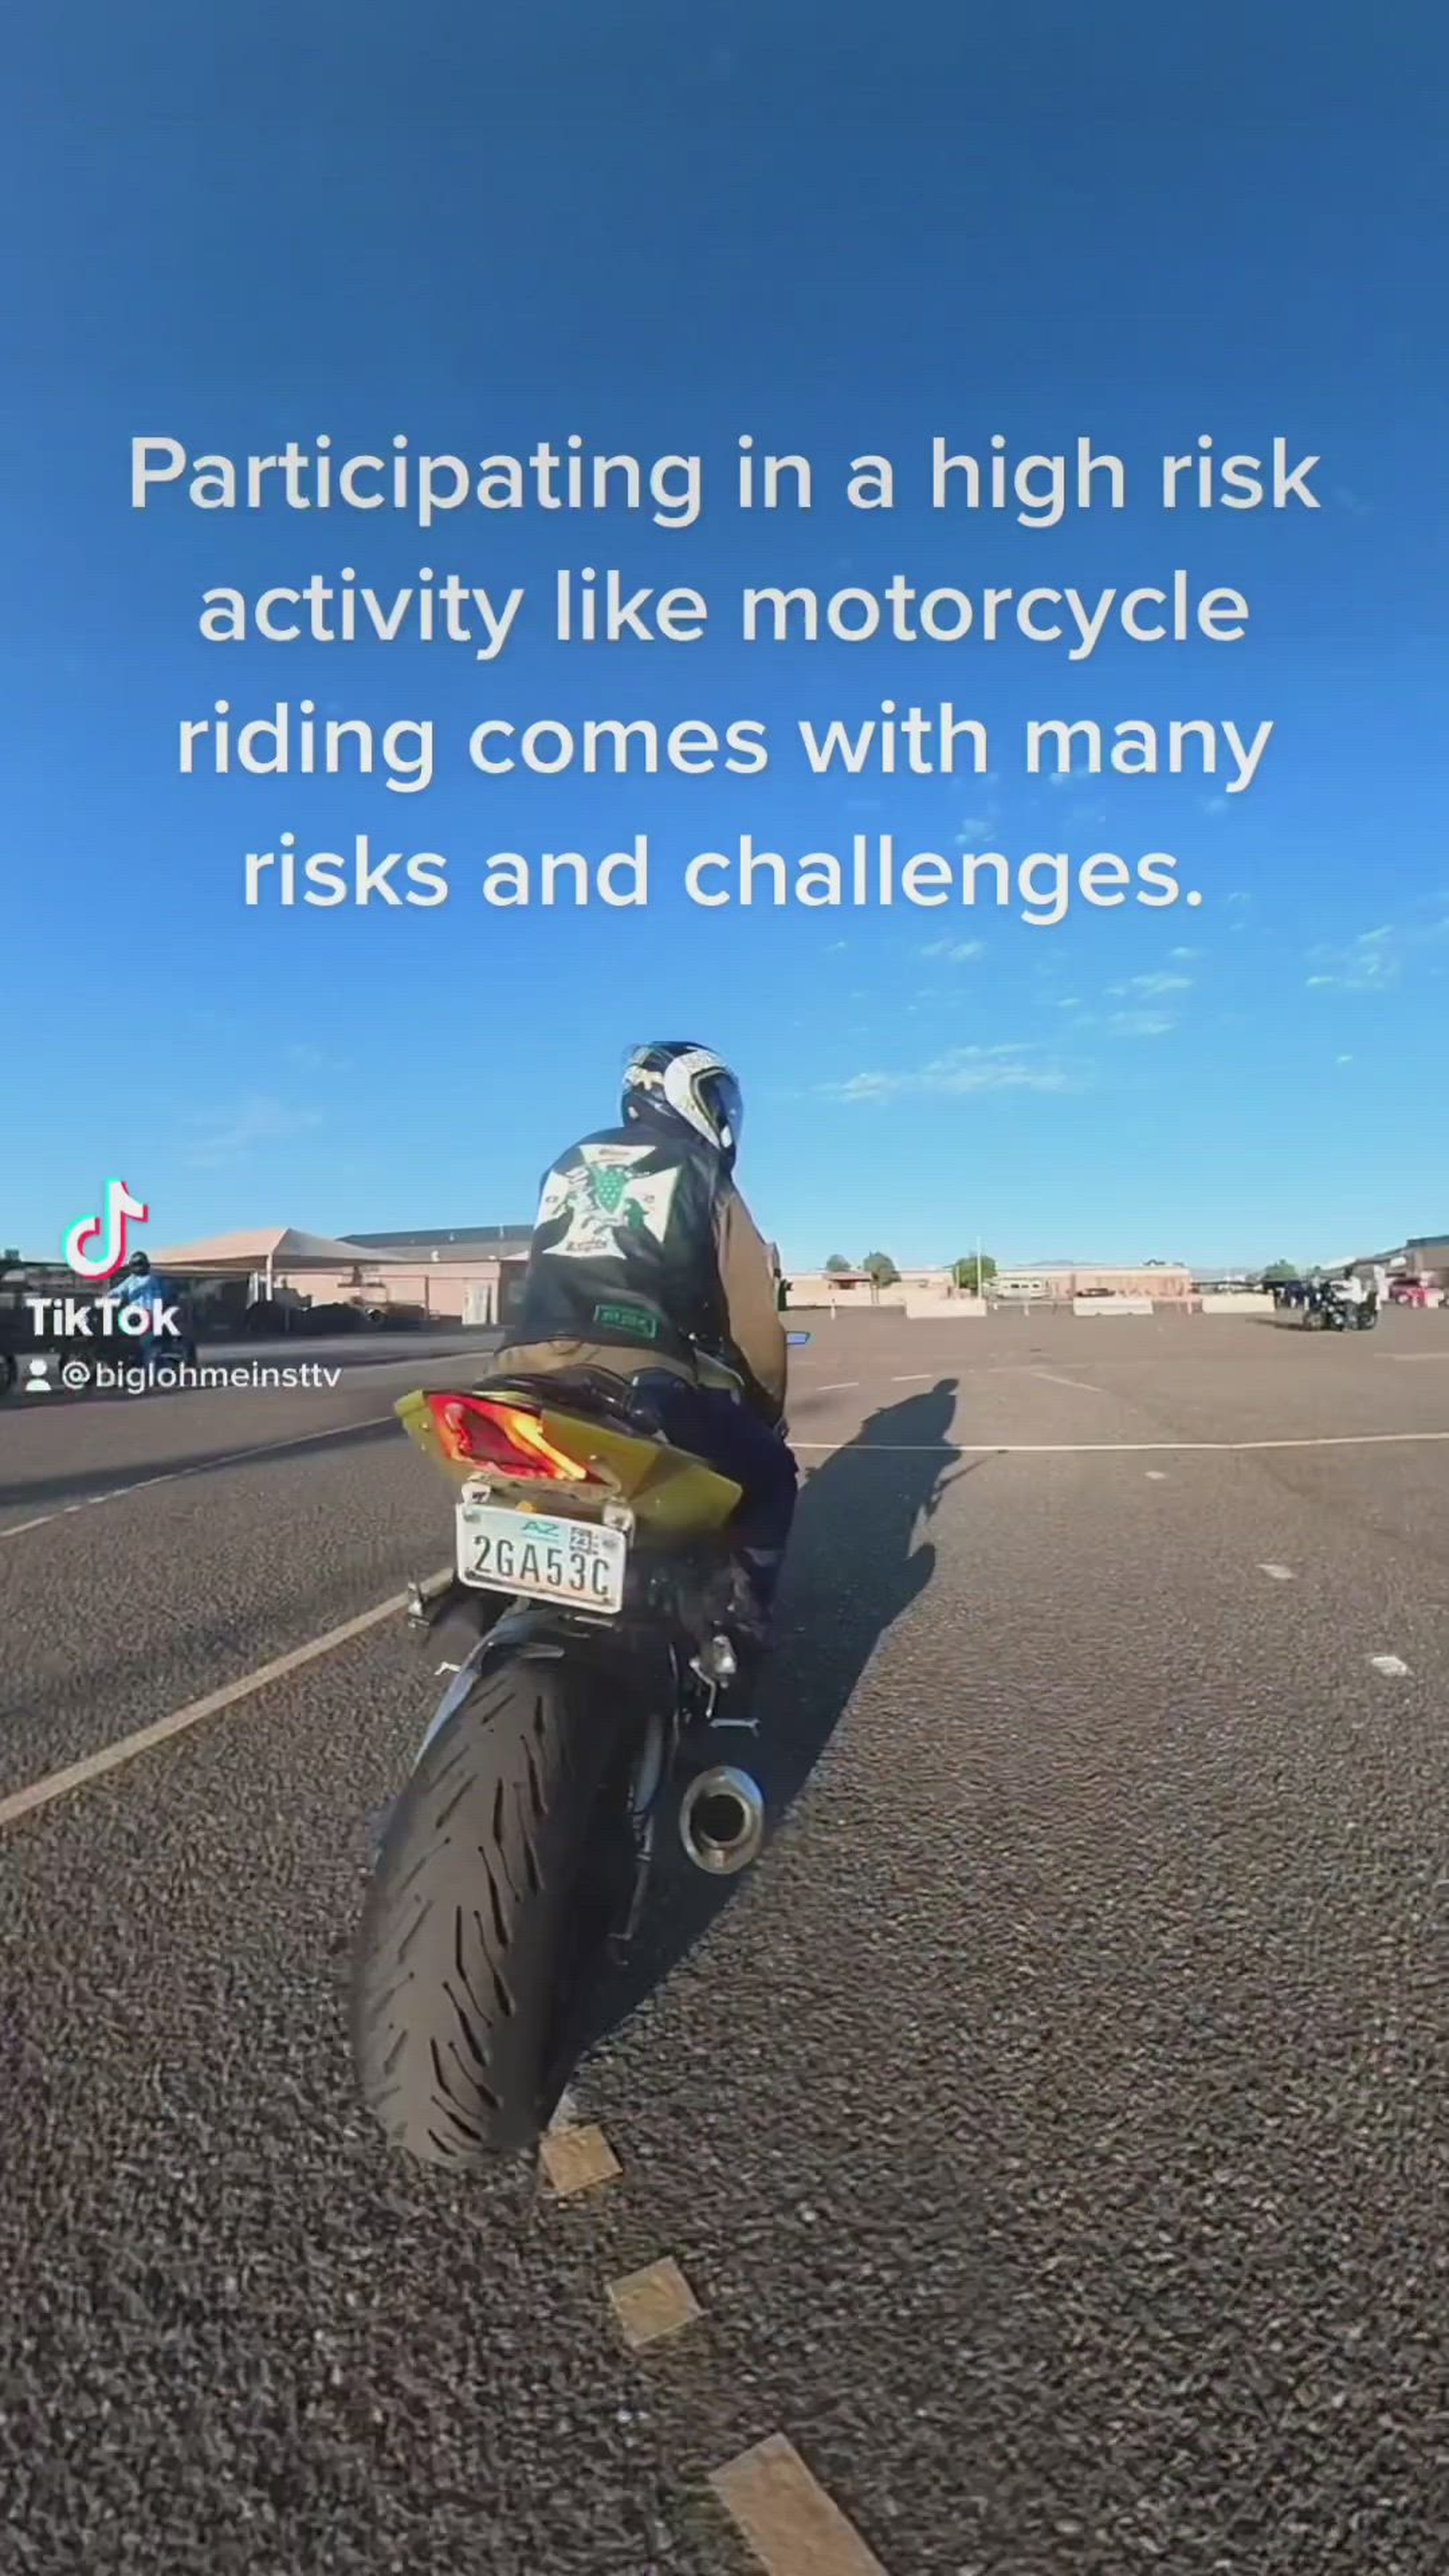 As part of the Air Force Safety Center's Off-Duty Risk Management video
contest the 56th Fighter Wing from Luke Air Force Base, AZ submitted their video on motorcycle safety. The video describes hazards motorcycle riders face while riding and requests they wear the proper personal protective gear. Always dress for the slide not the ride.